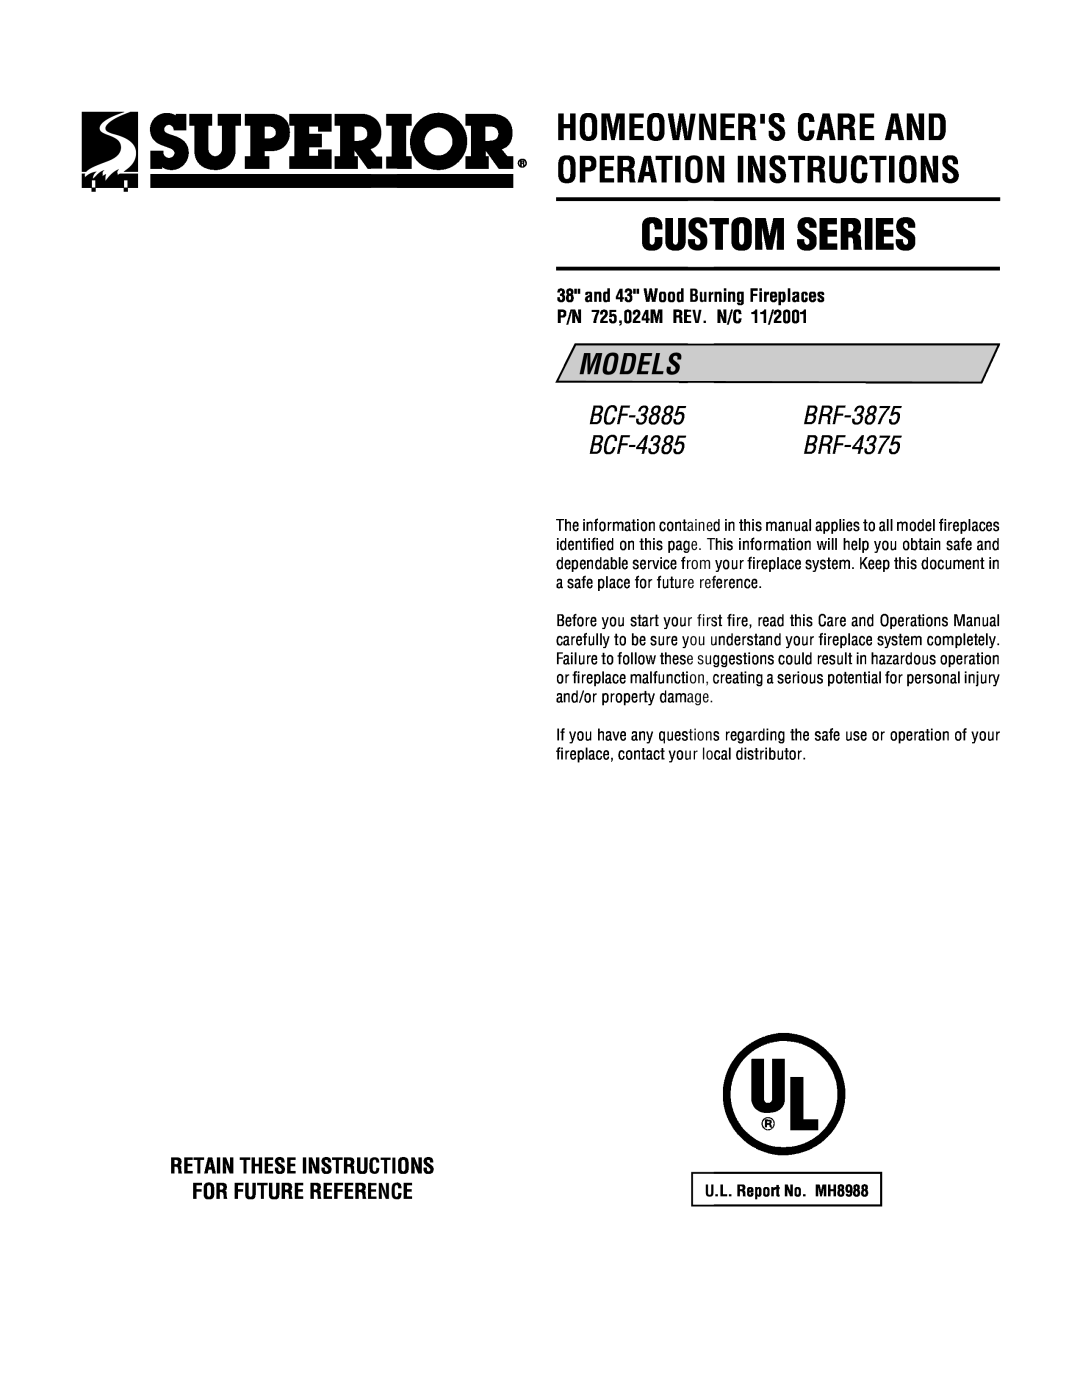 TOA Electronics BCF-3885 manual Retain These Instructions For Future Reference, Custom Series, Models 